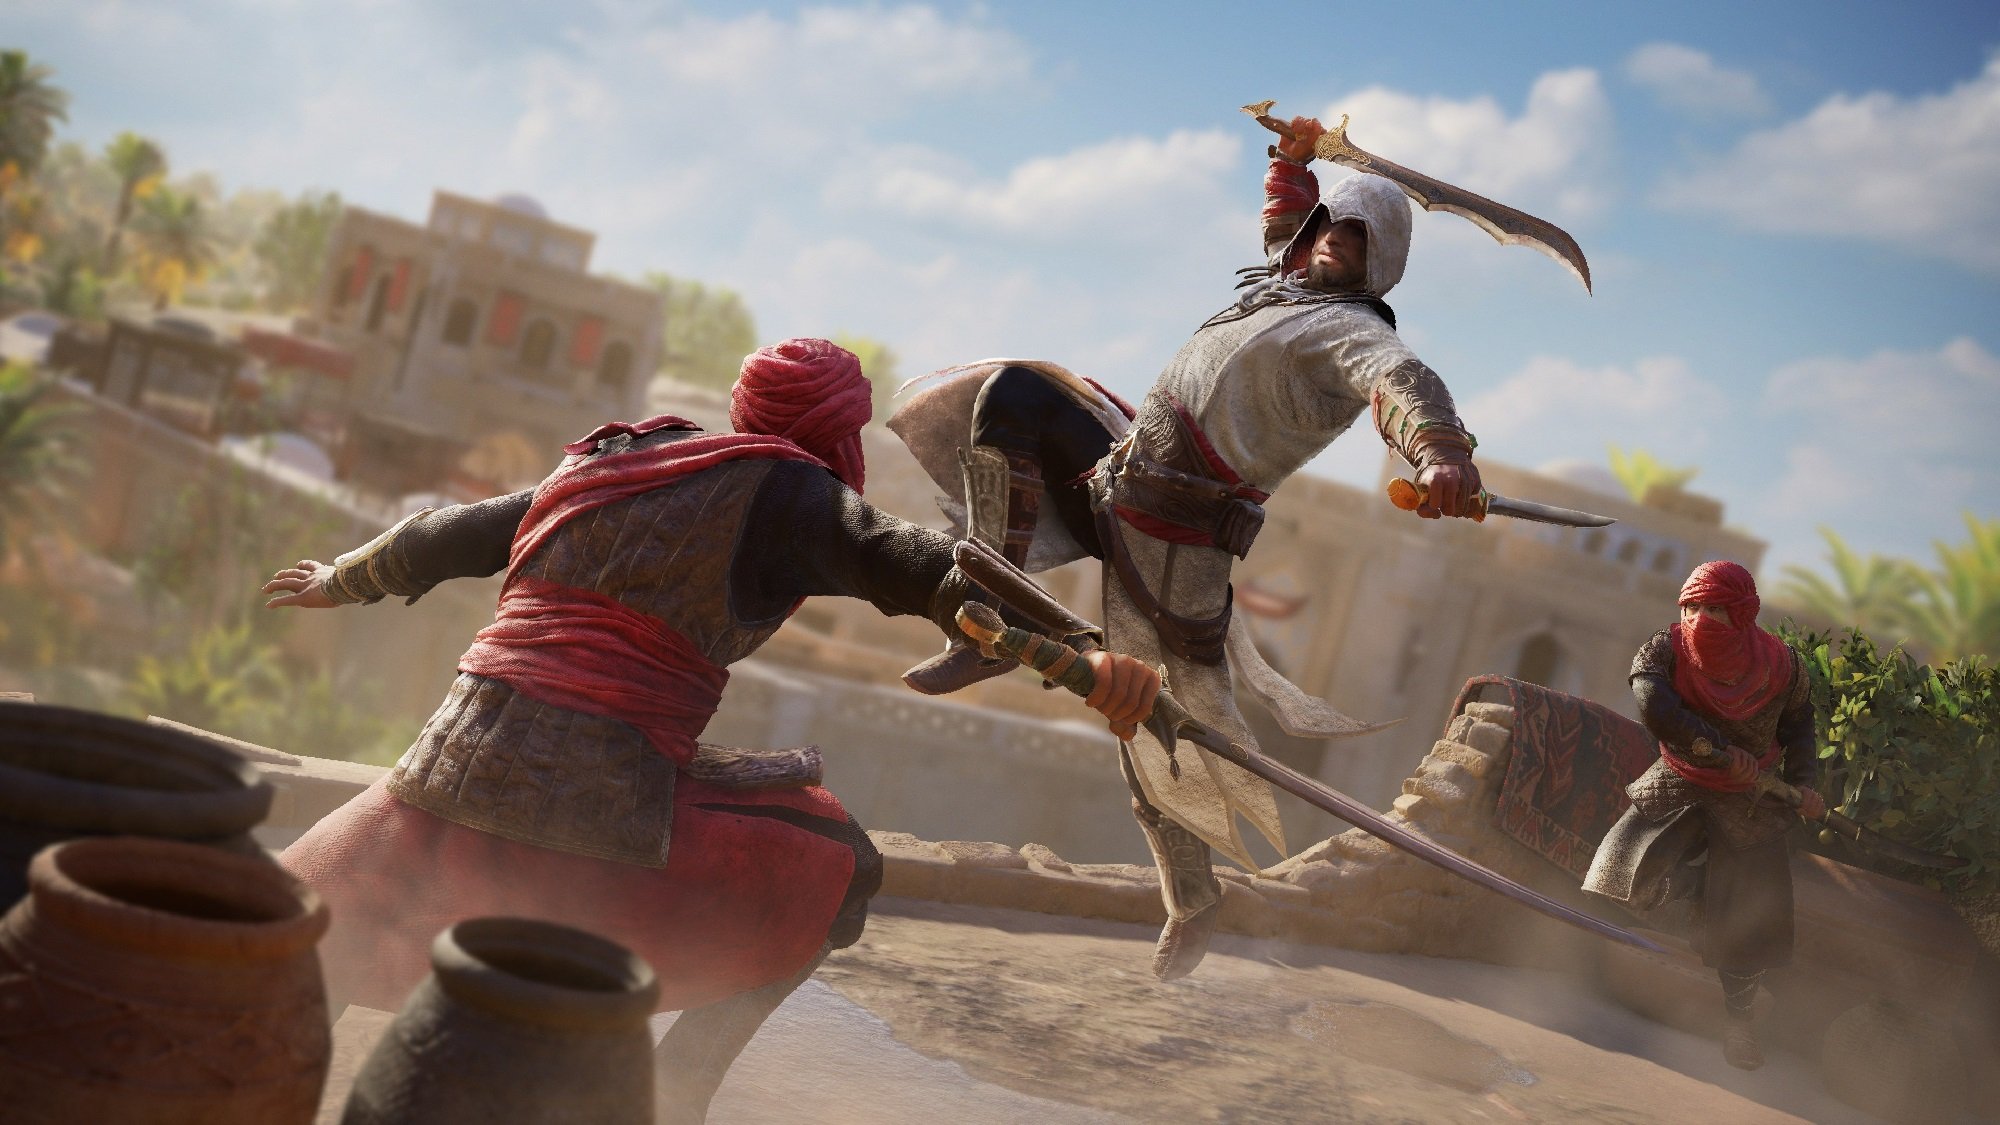 Assassin's Creed Codename Red is focusing on stealth? 